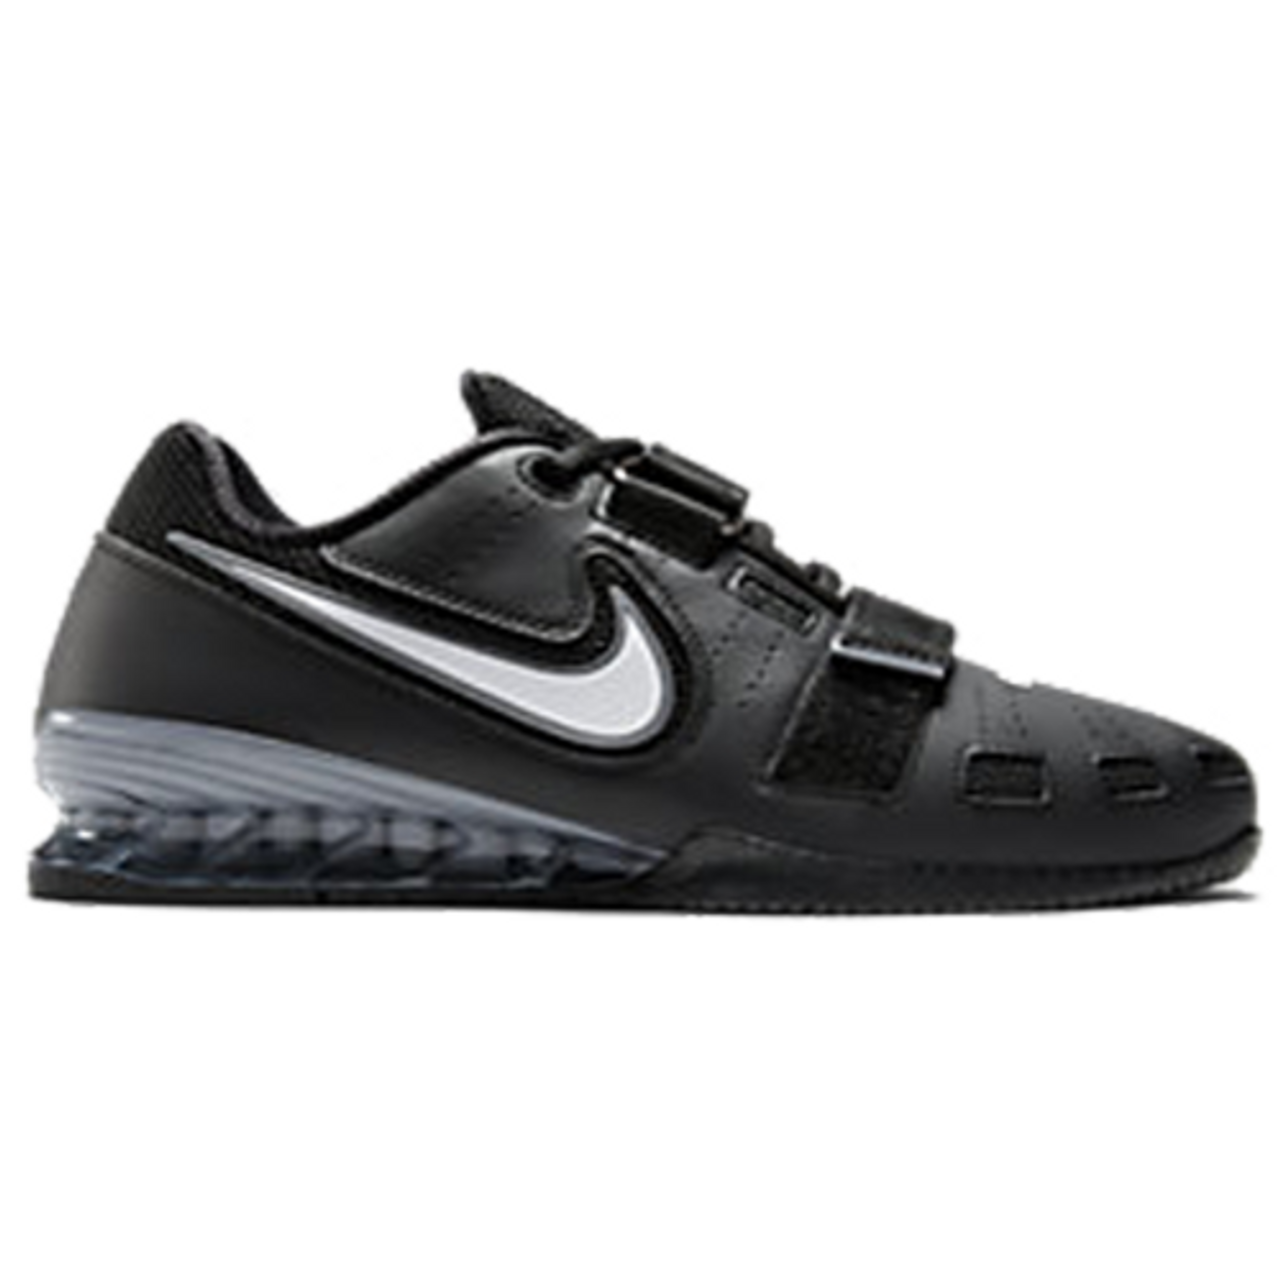 Nike Romaleos 2 Weightlifting Shoes (Multiple Colors)